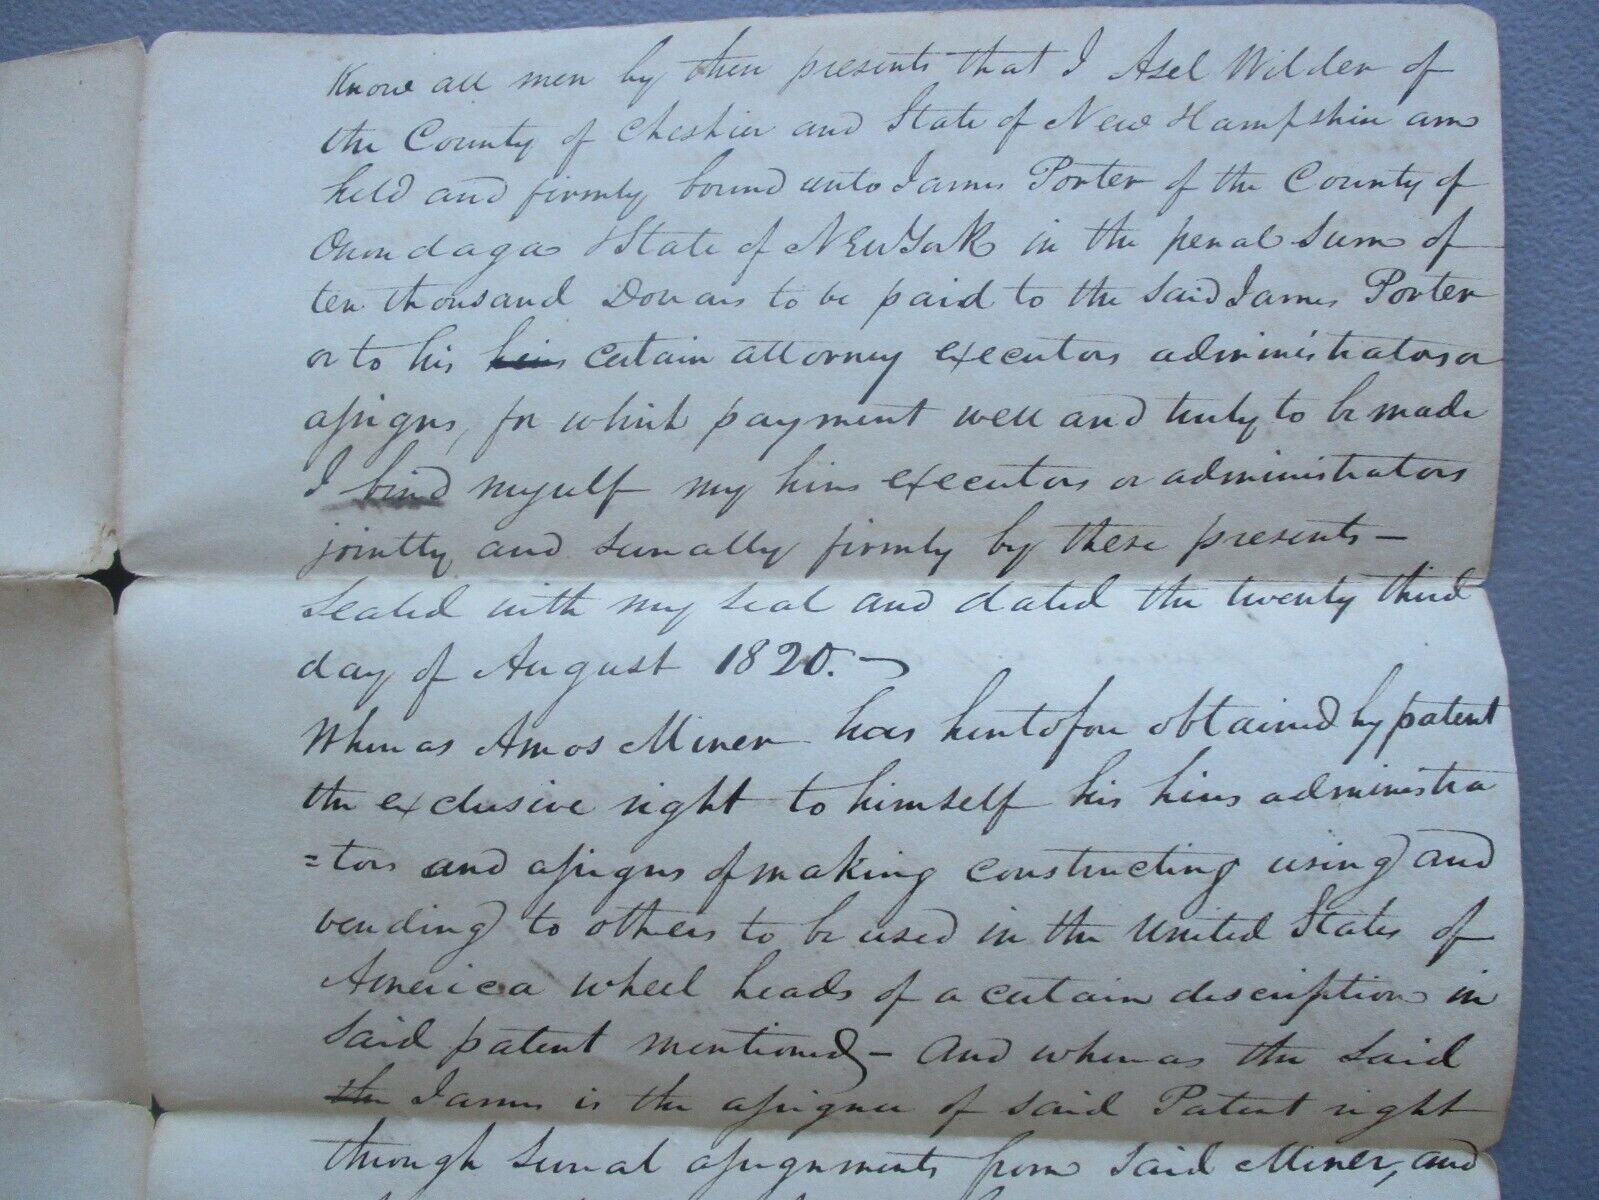 1820 Inventor Azel Wilder Cheshire,N.H.(Amos Miner/Spinning wheel) signed letter